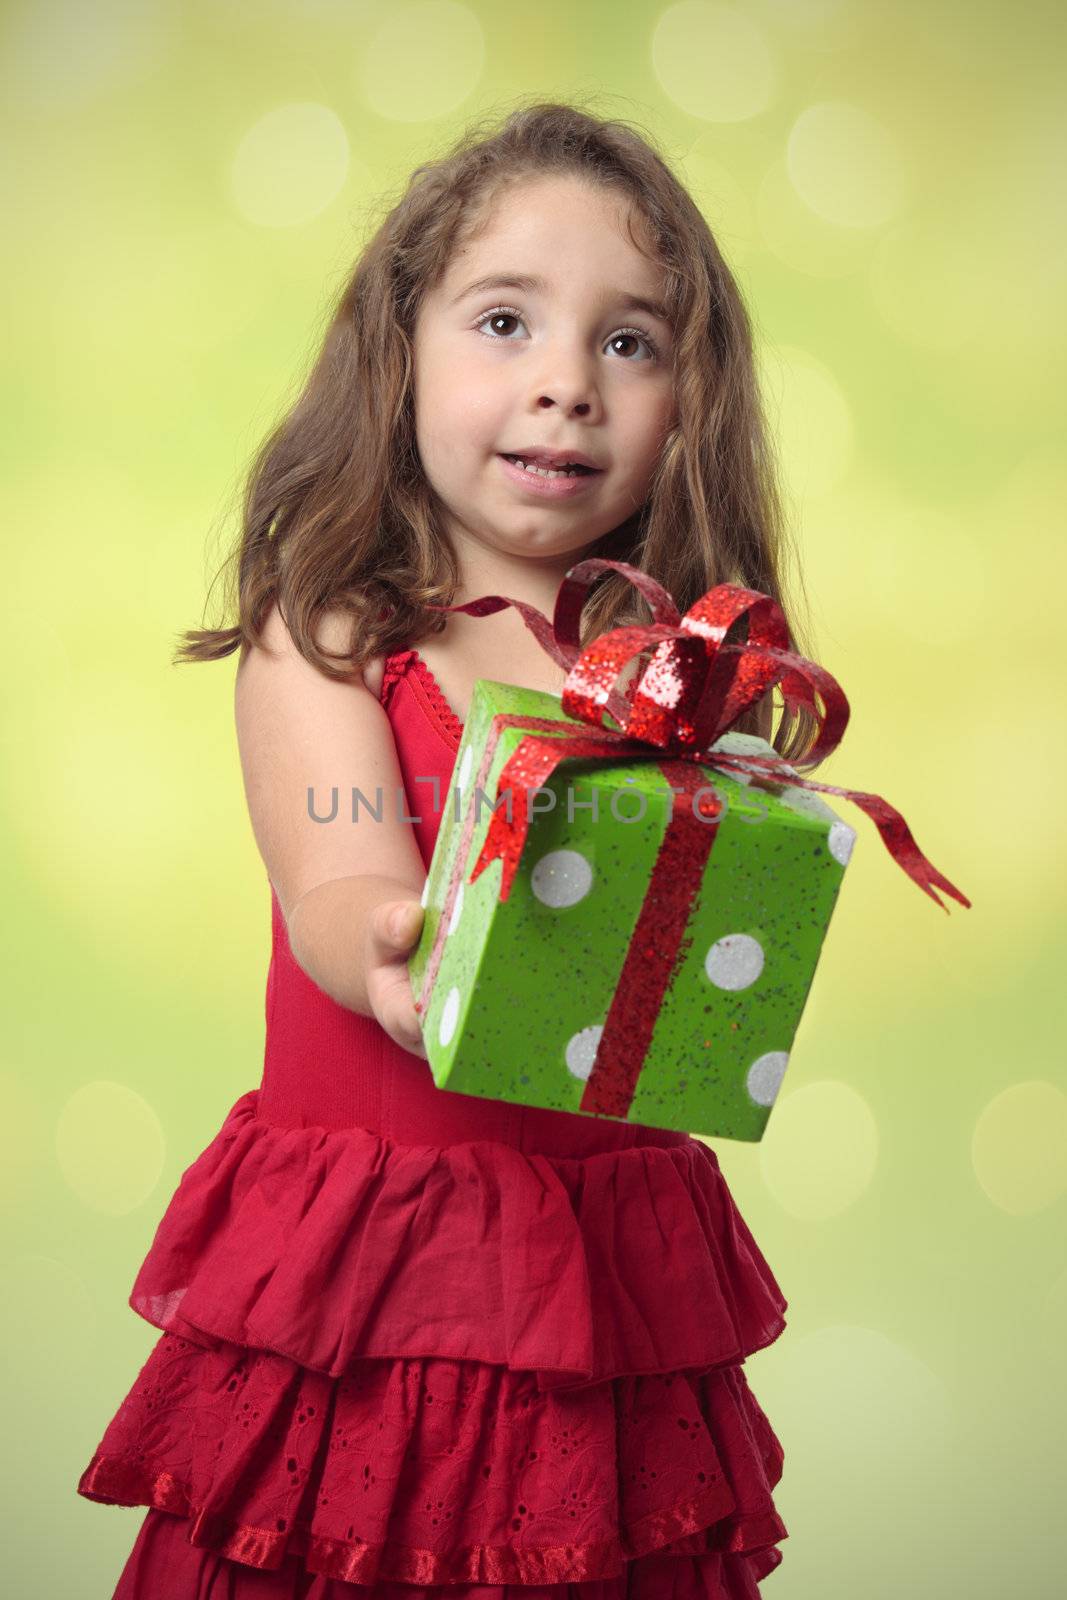 Pretty girl giving present by lovleah